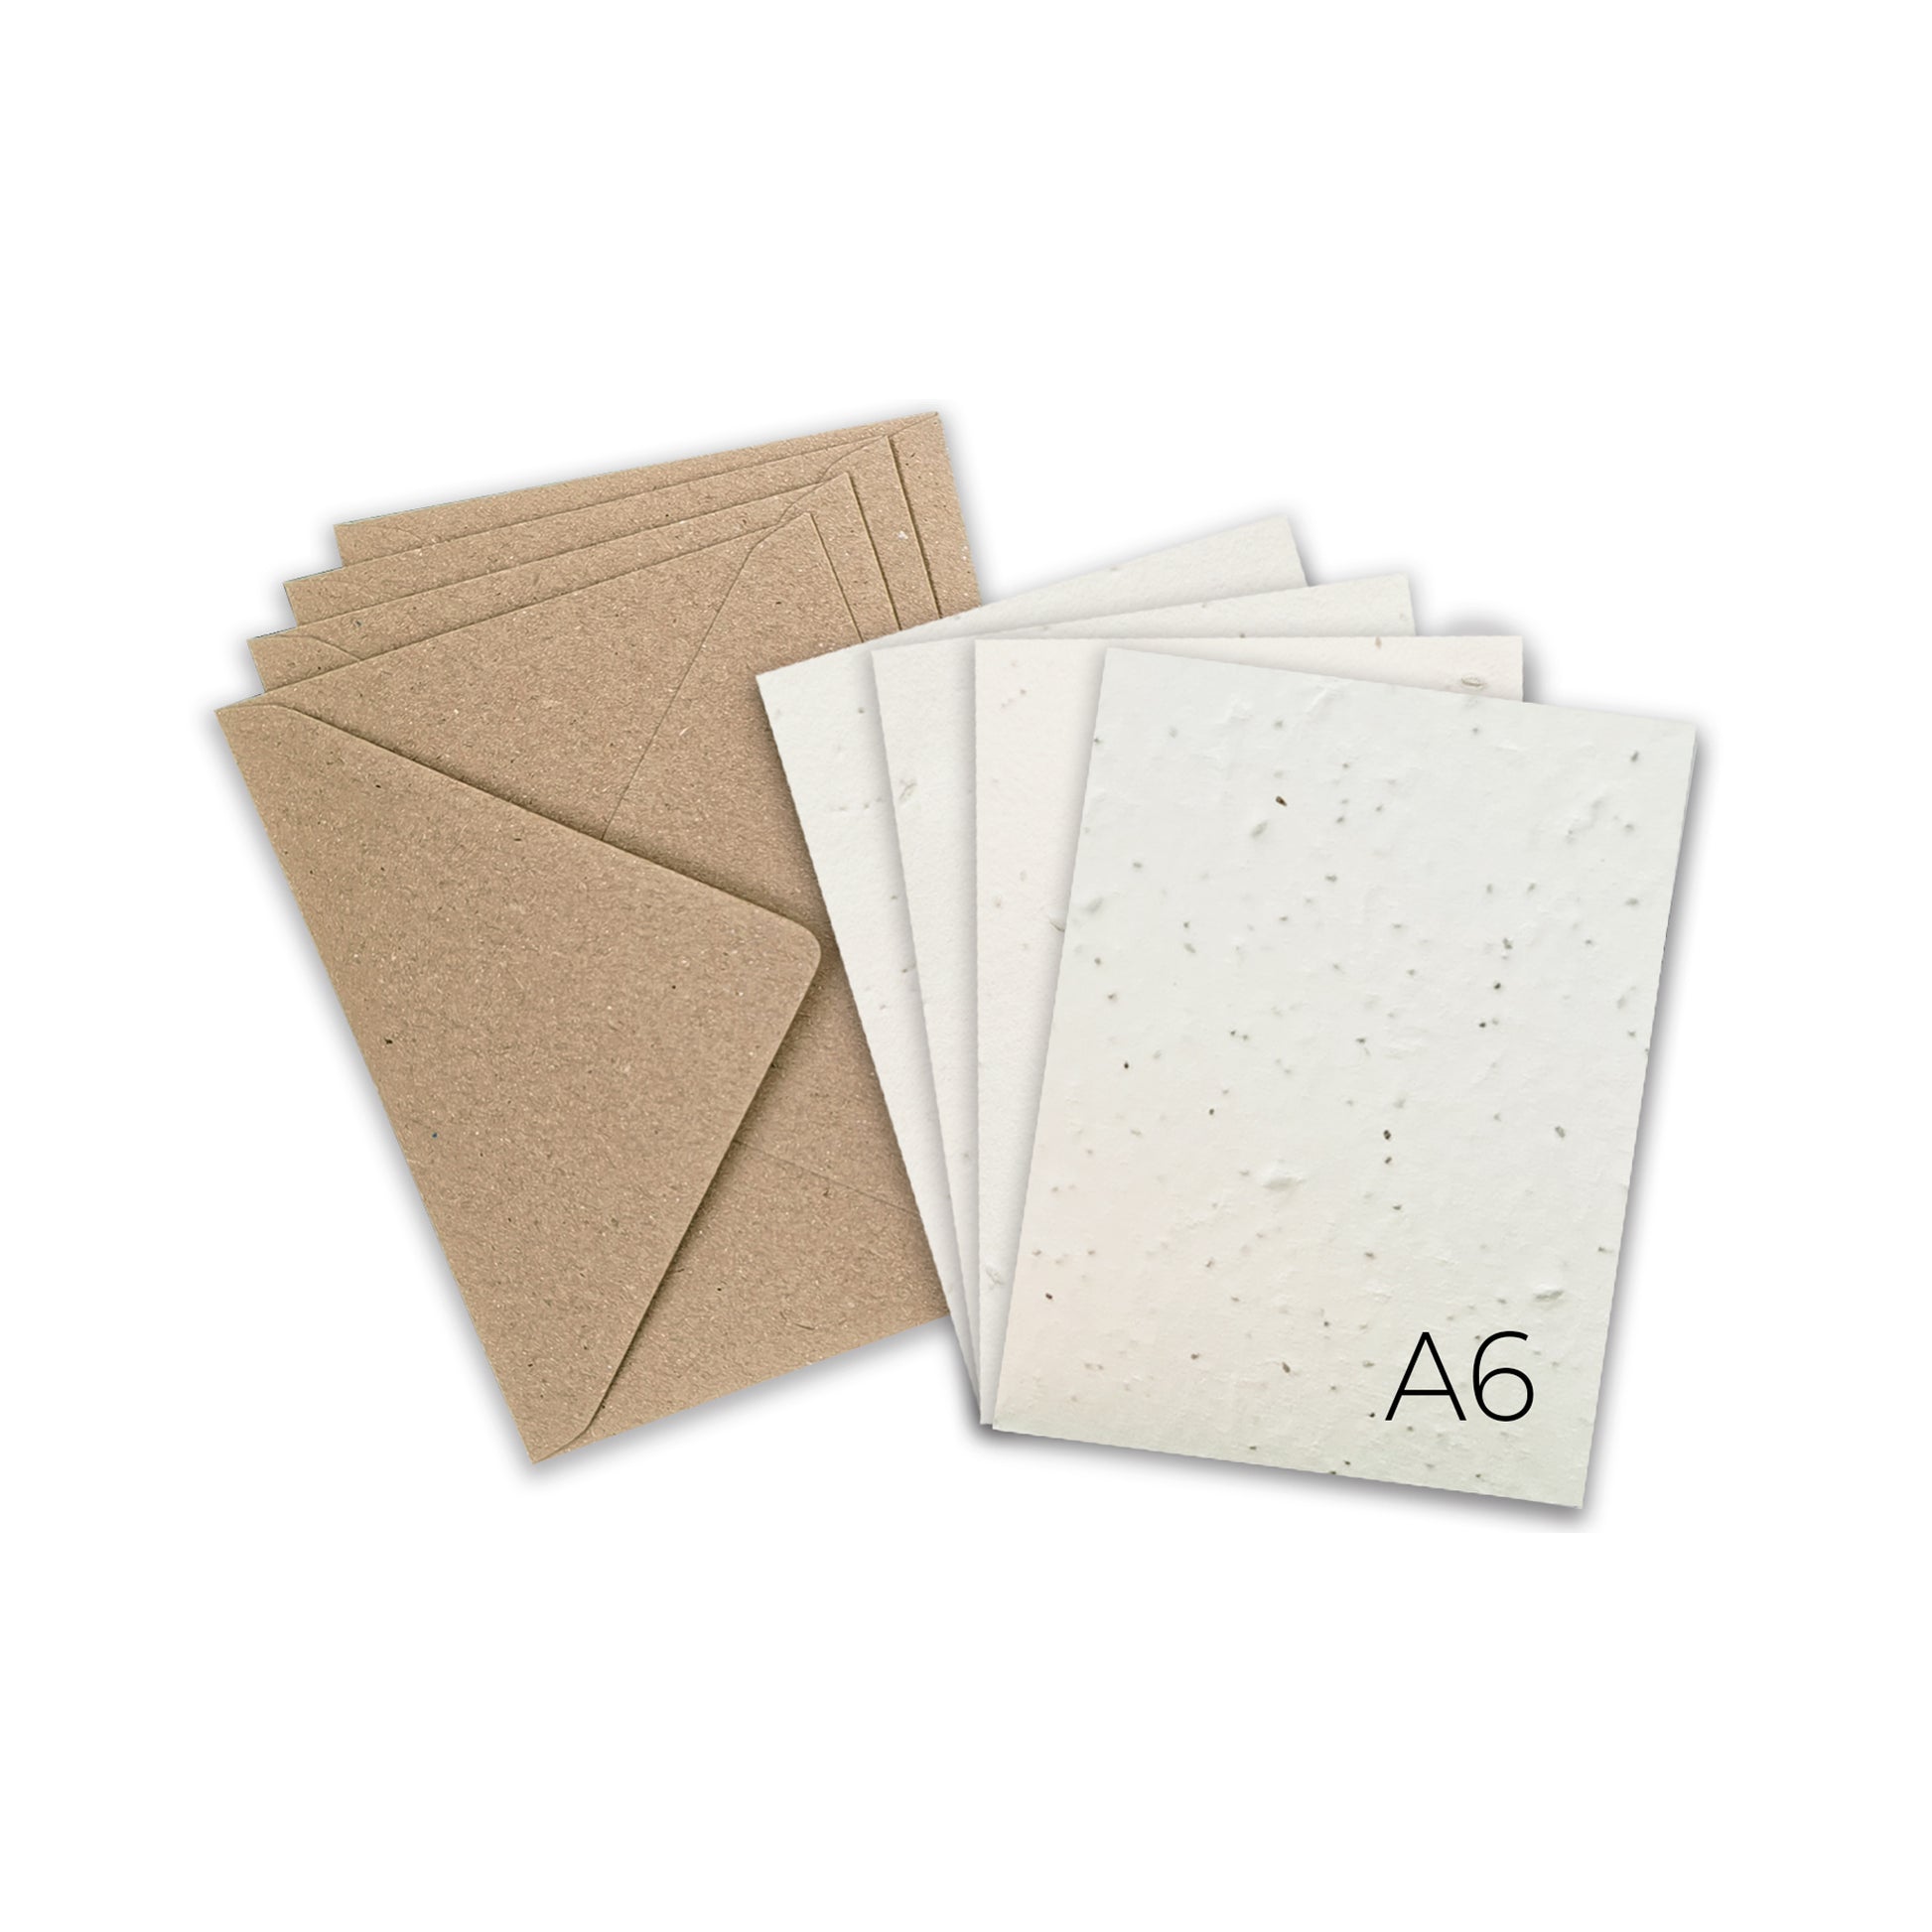 Blank Greeting Cards & Envelopes Size A6 10 Pack | OESD #OESD846